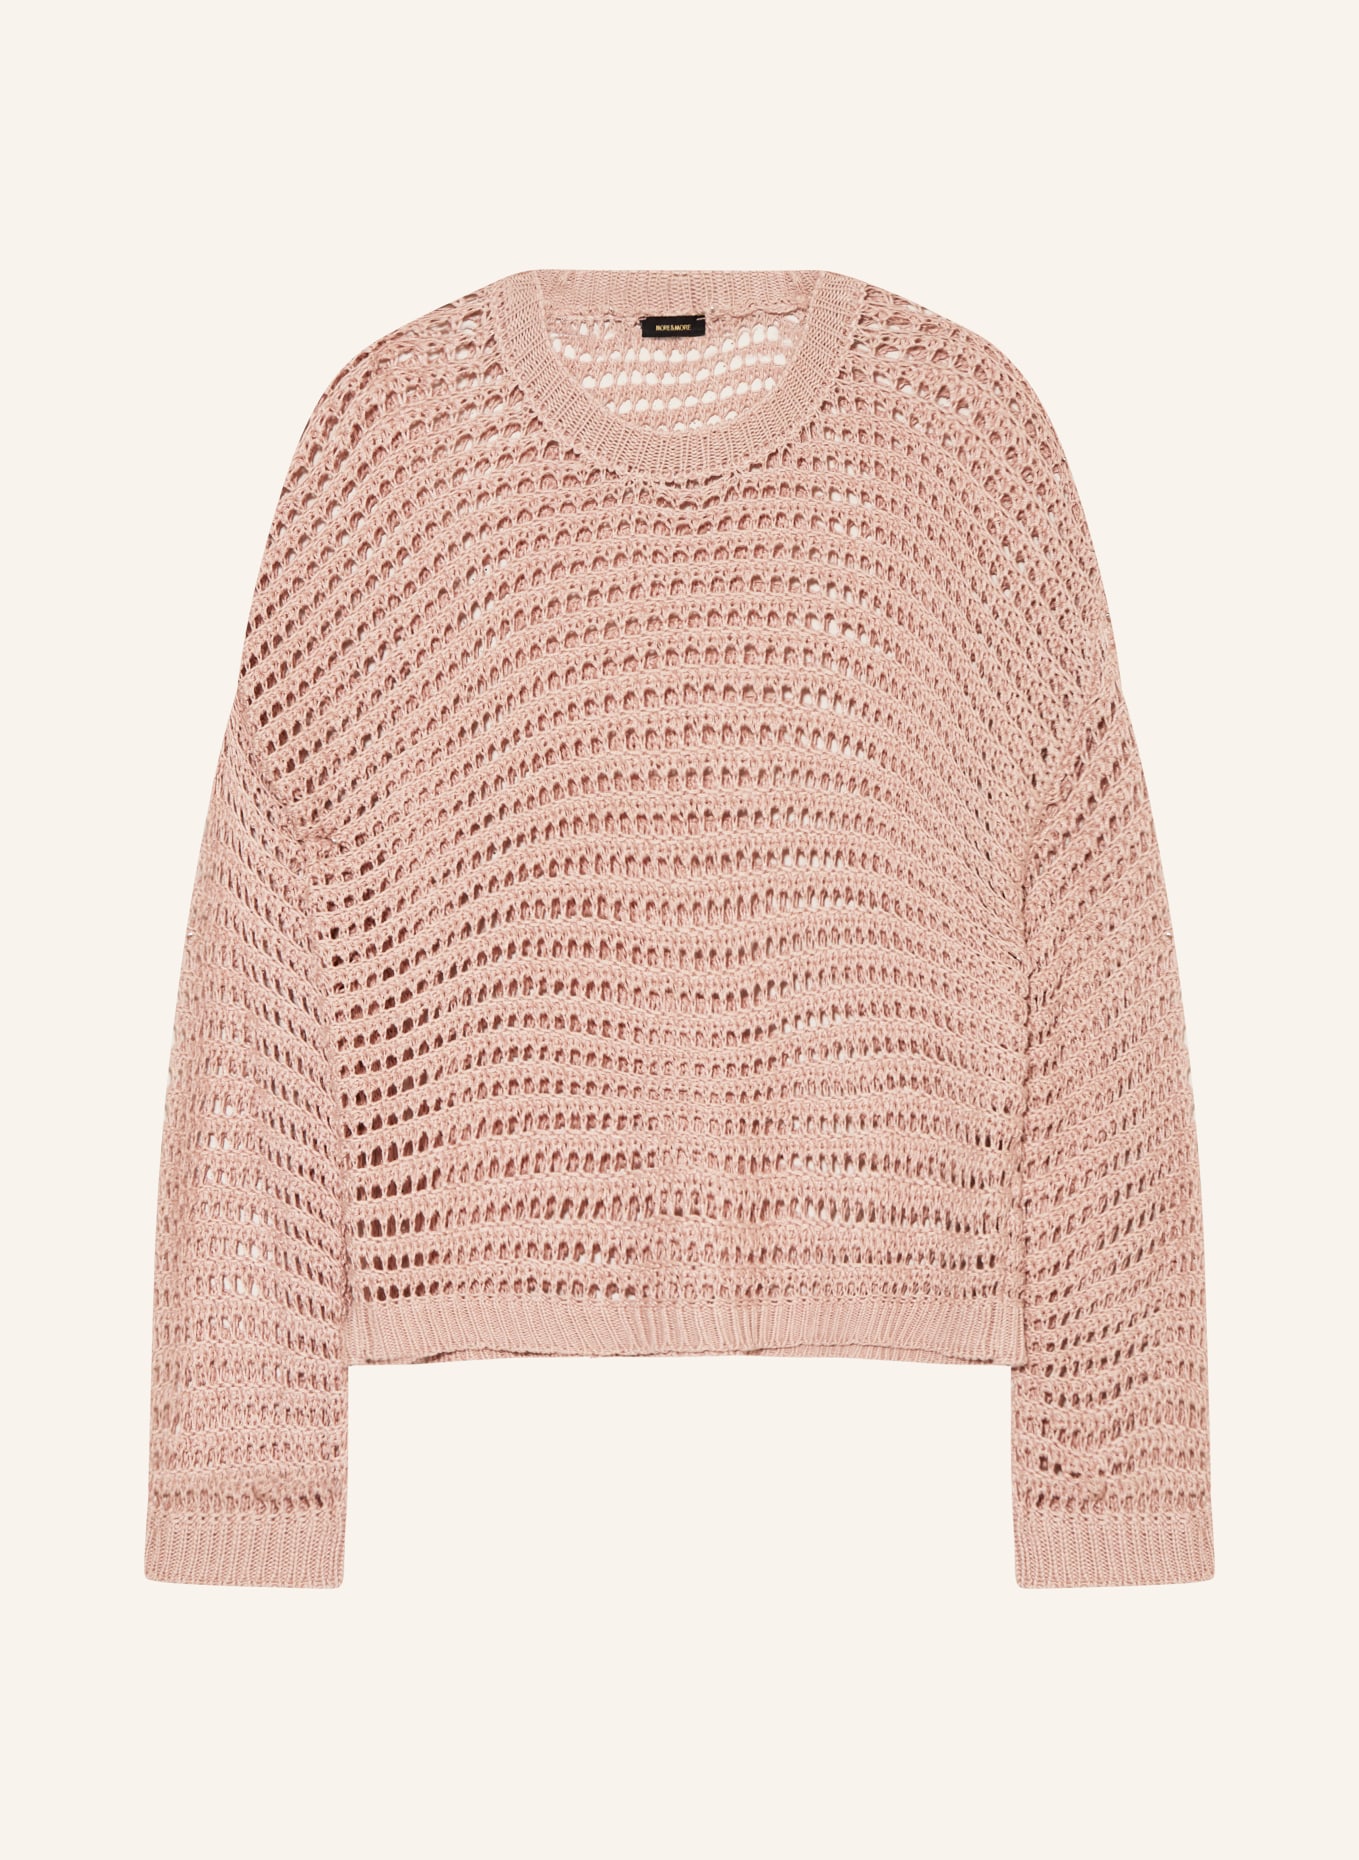 MORE & MORE Oversized sweater, Color: DUSKY PINK (Image 1)